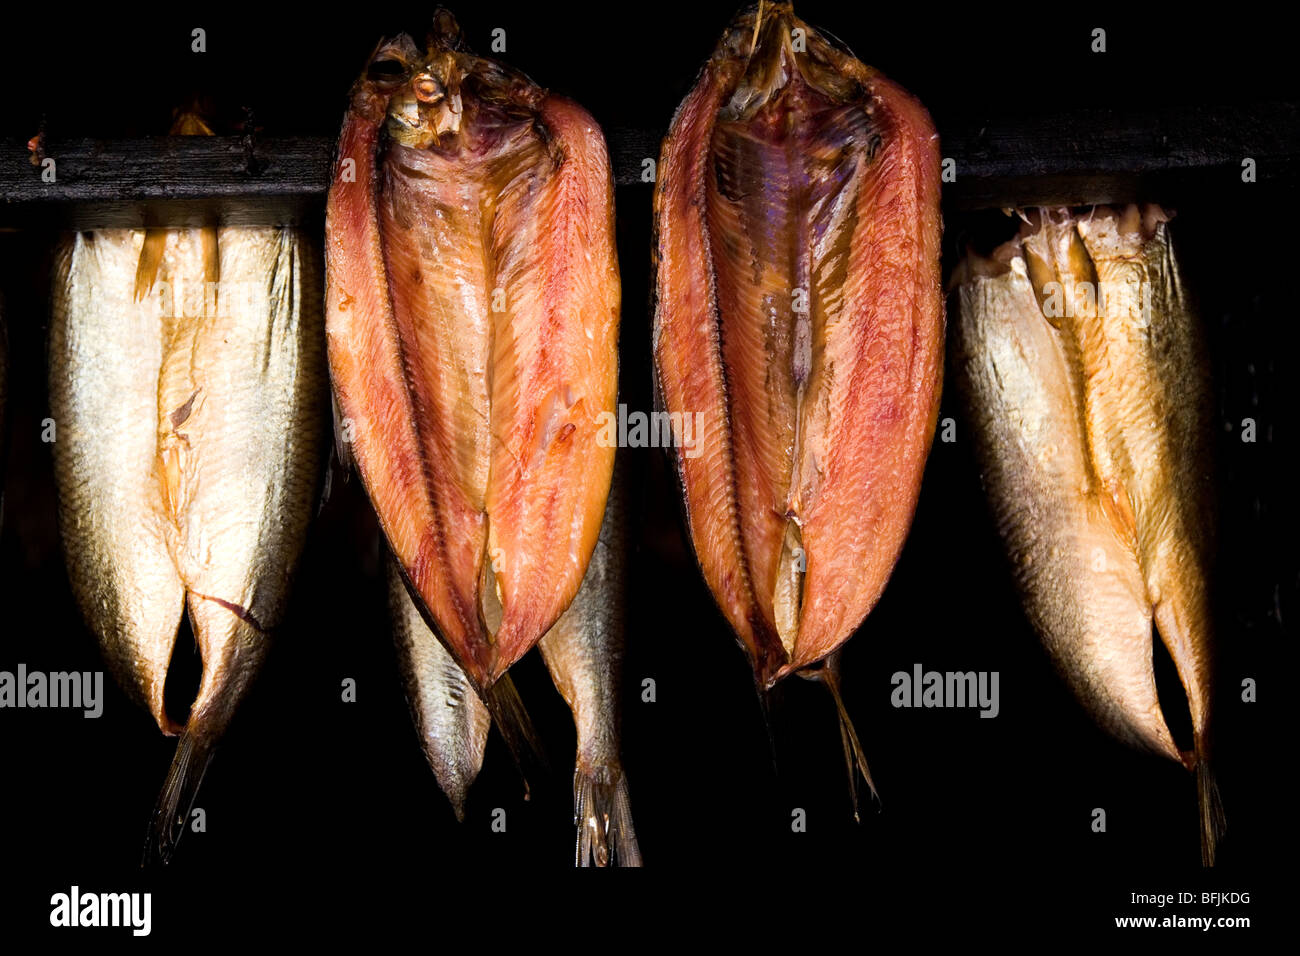 Kippers are hung, using traditional methods, at Whitby in North Yorkshire, England. Stock Photo